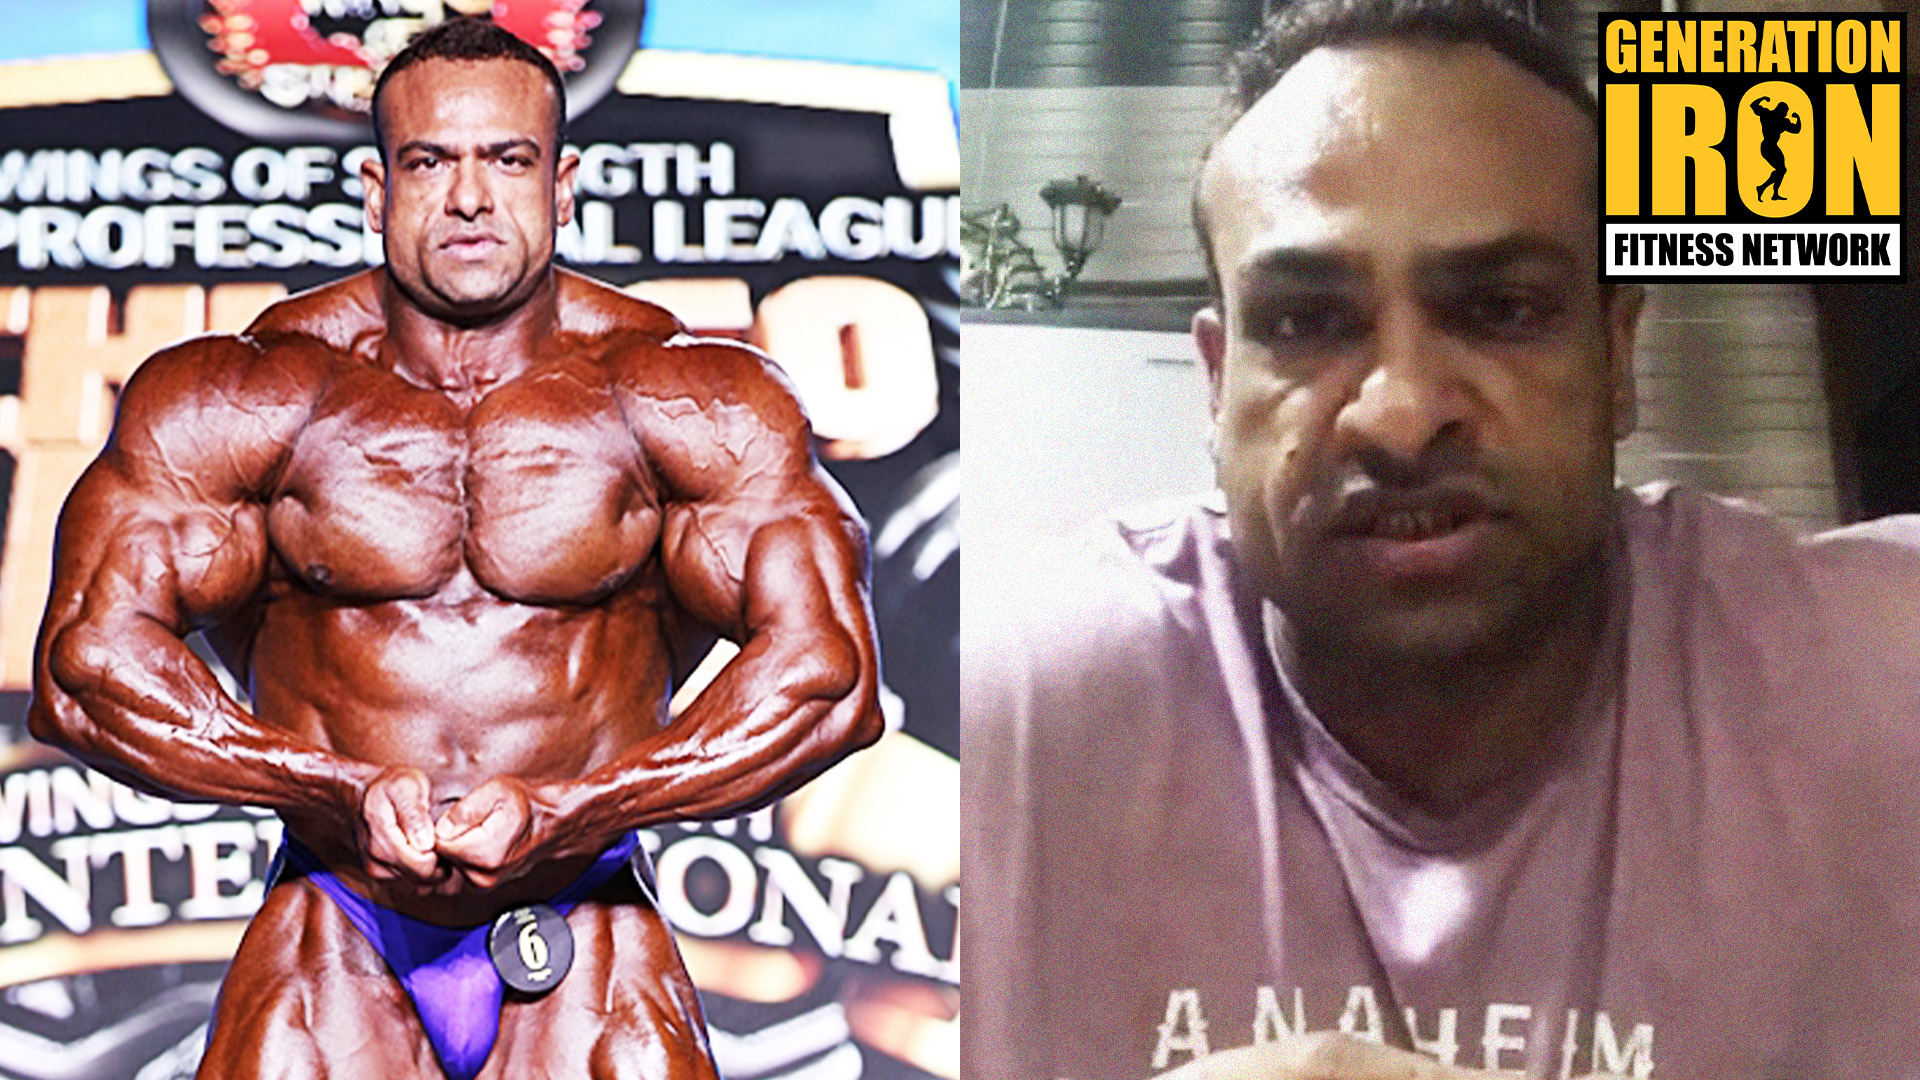 INTERVIEW: Inside Mohamed El Emam’s Contest Prep Plan To Dominate At The Arnold Classic 2021